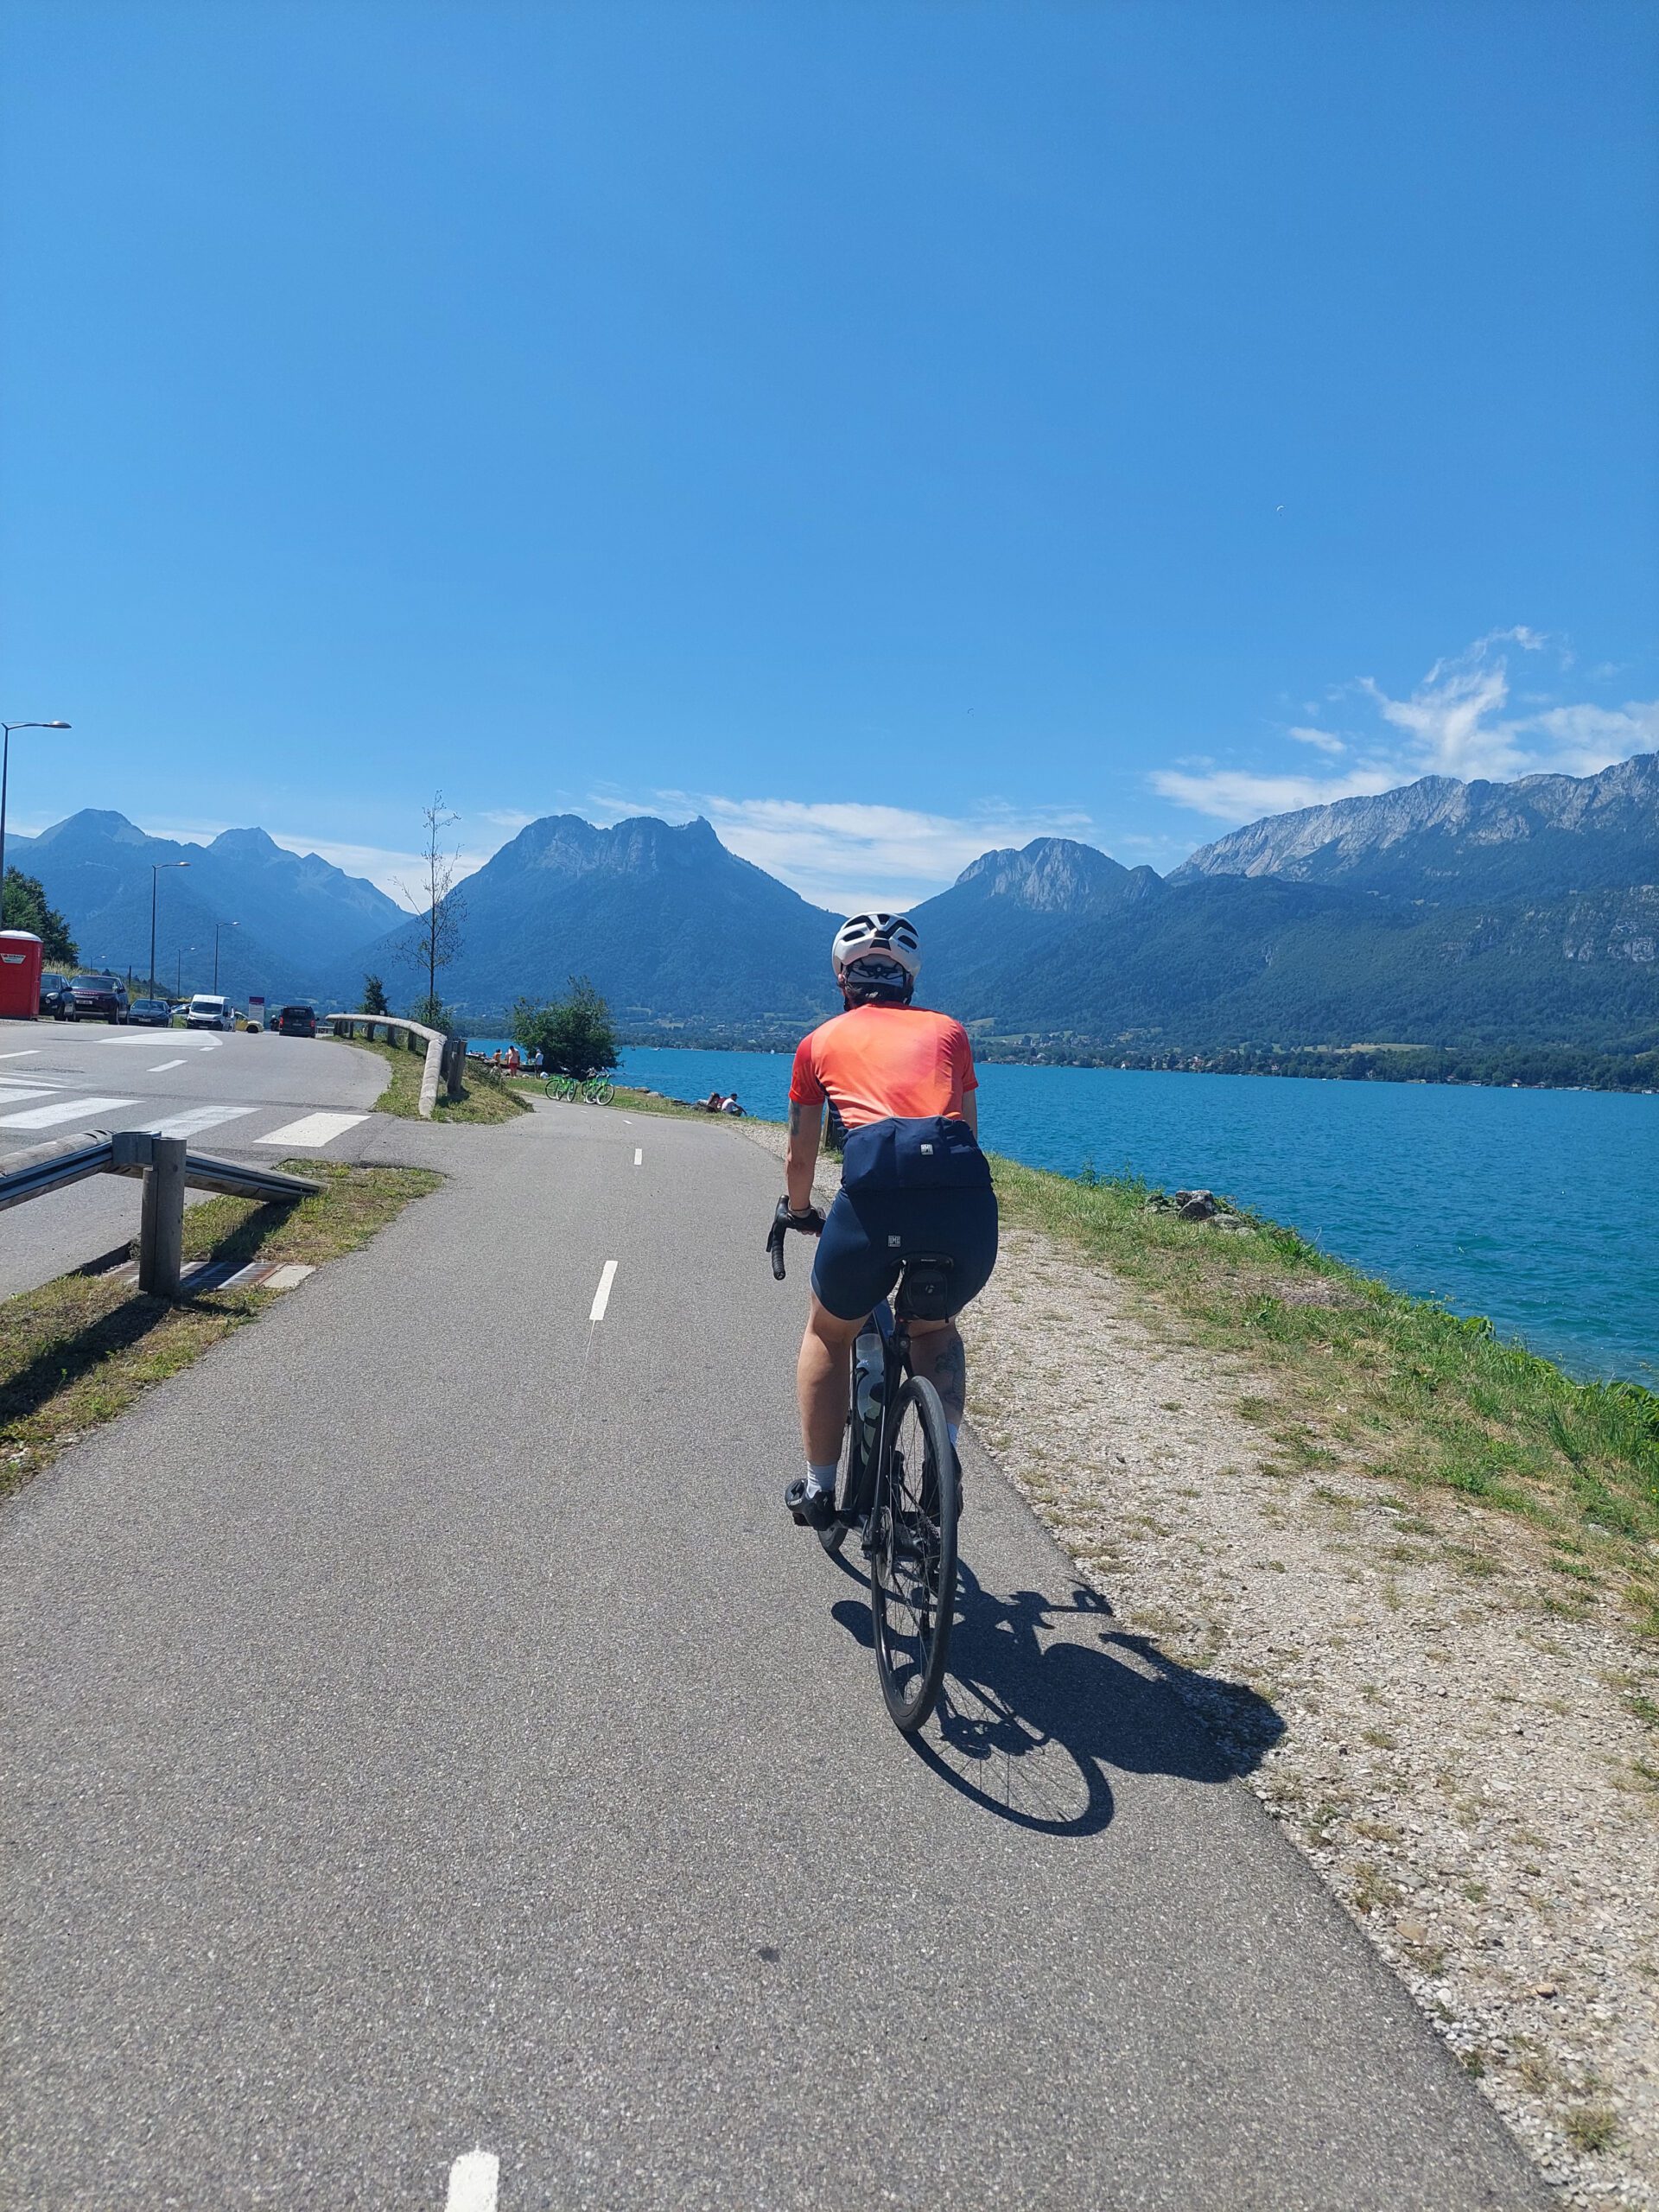 A person riding a bike from the back next to the lake of Annecy